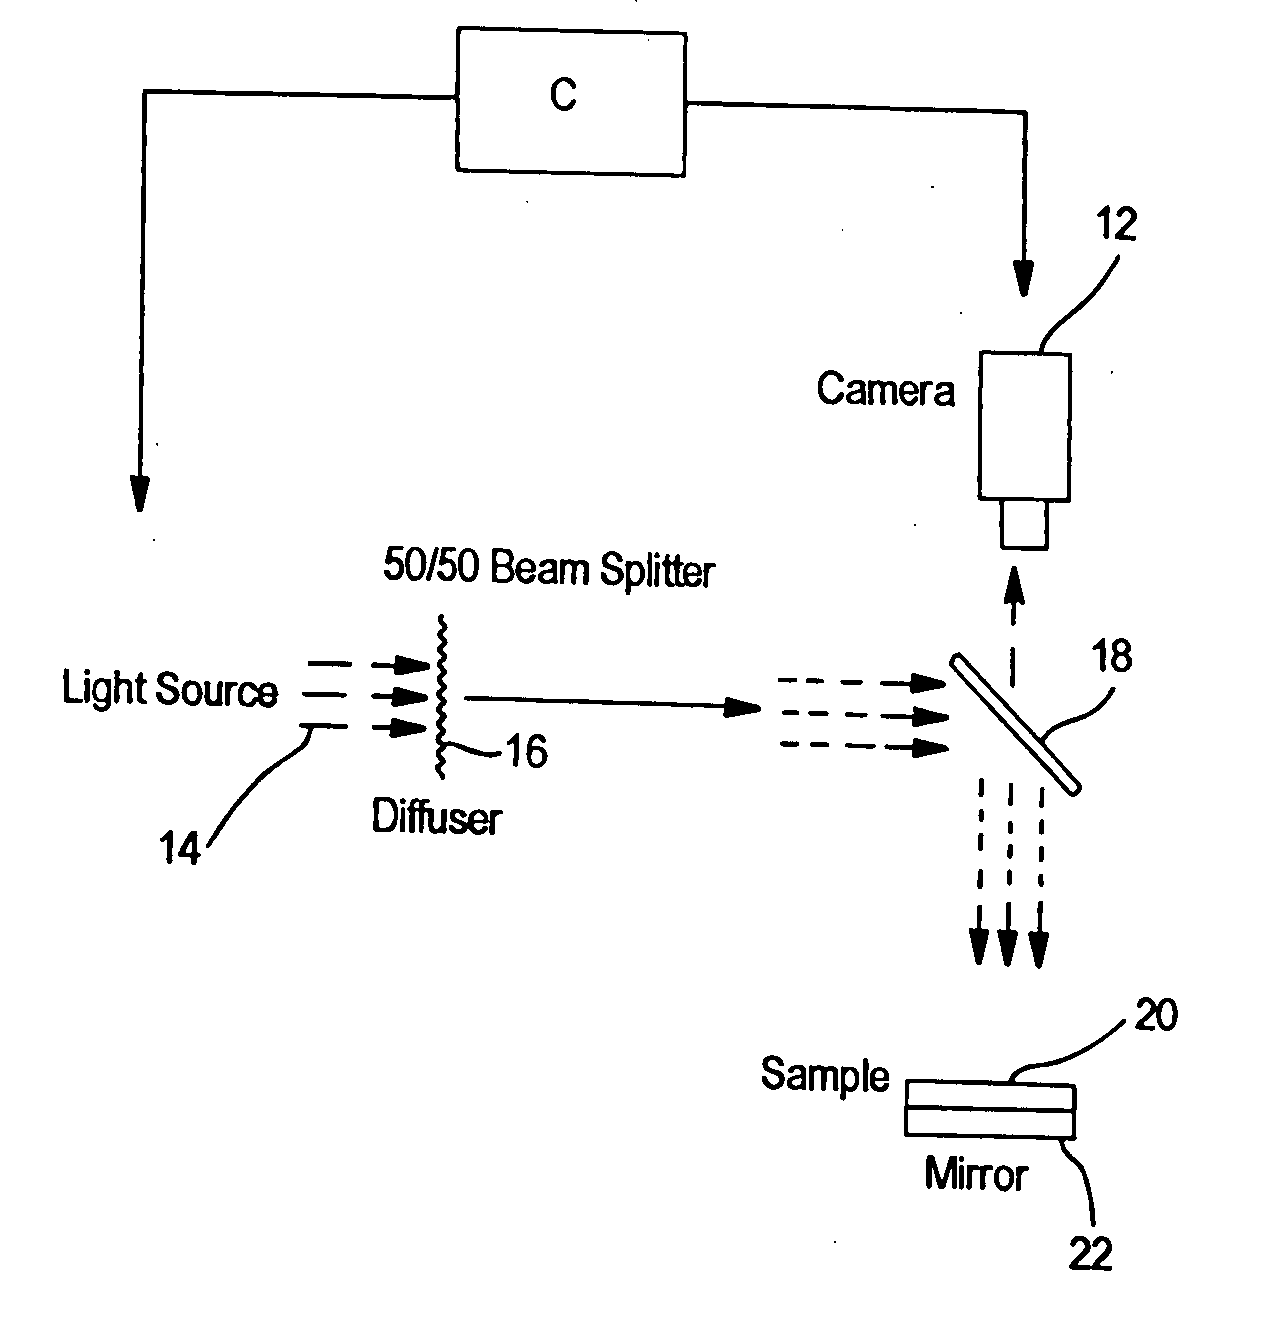 Optical method for evaluating surface and physical properties of structures made wholly or partially from fibers, films, polymers or a combination thereof